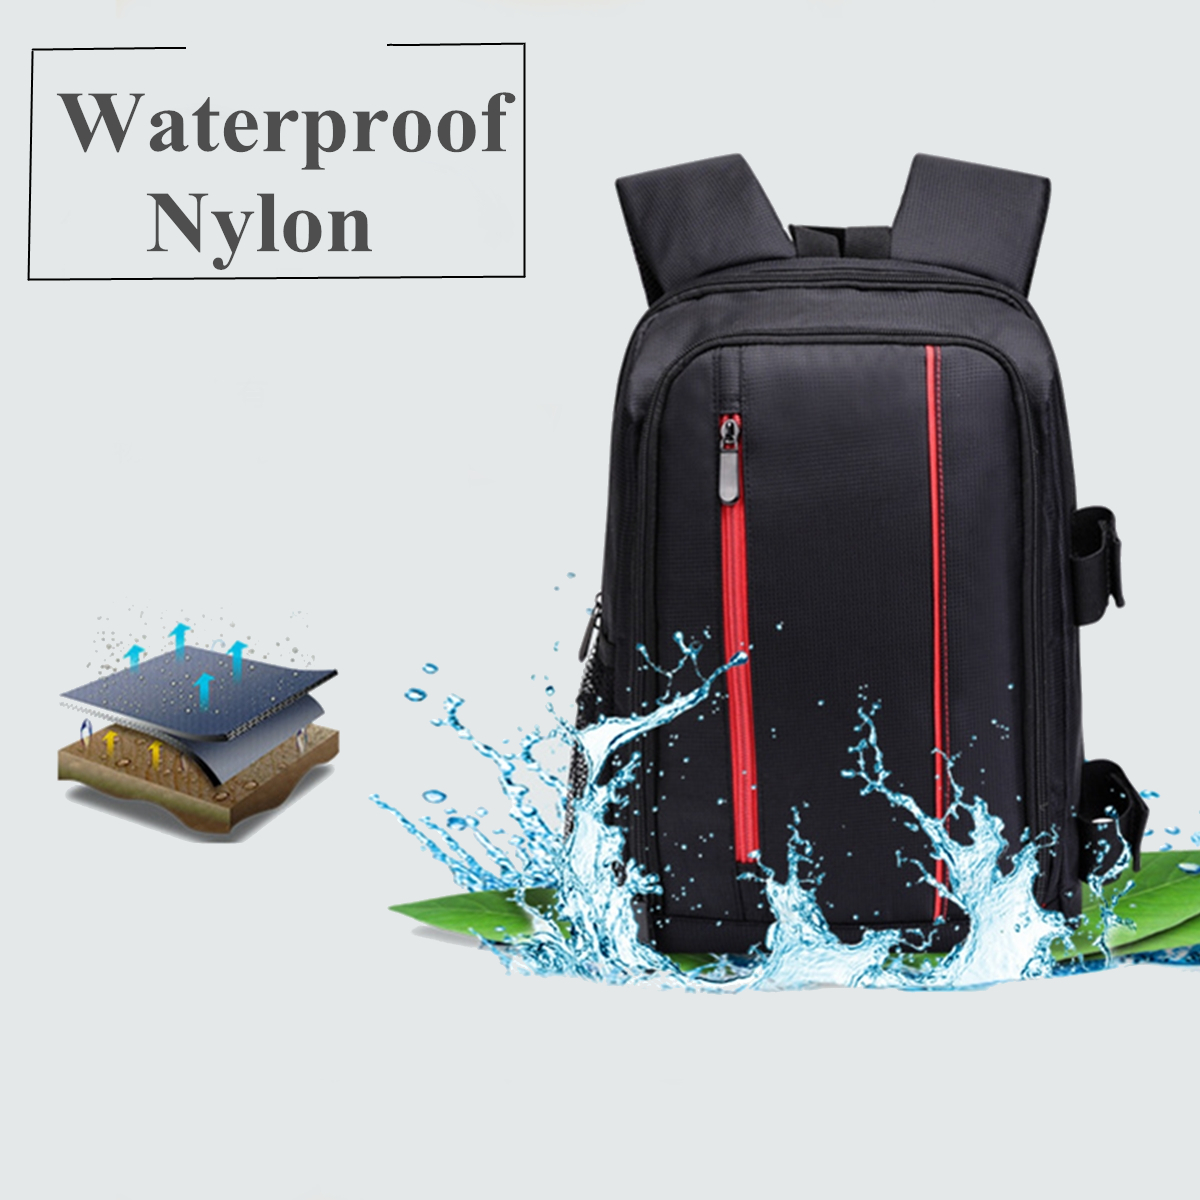 Waterproof Camera Backpack Travel DSLR Bag W/ Rain Cover For Canon Sony 37